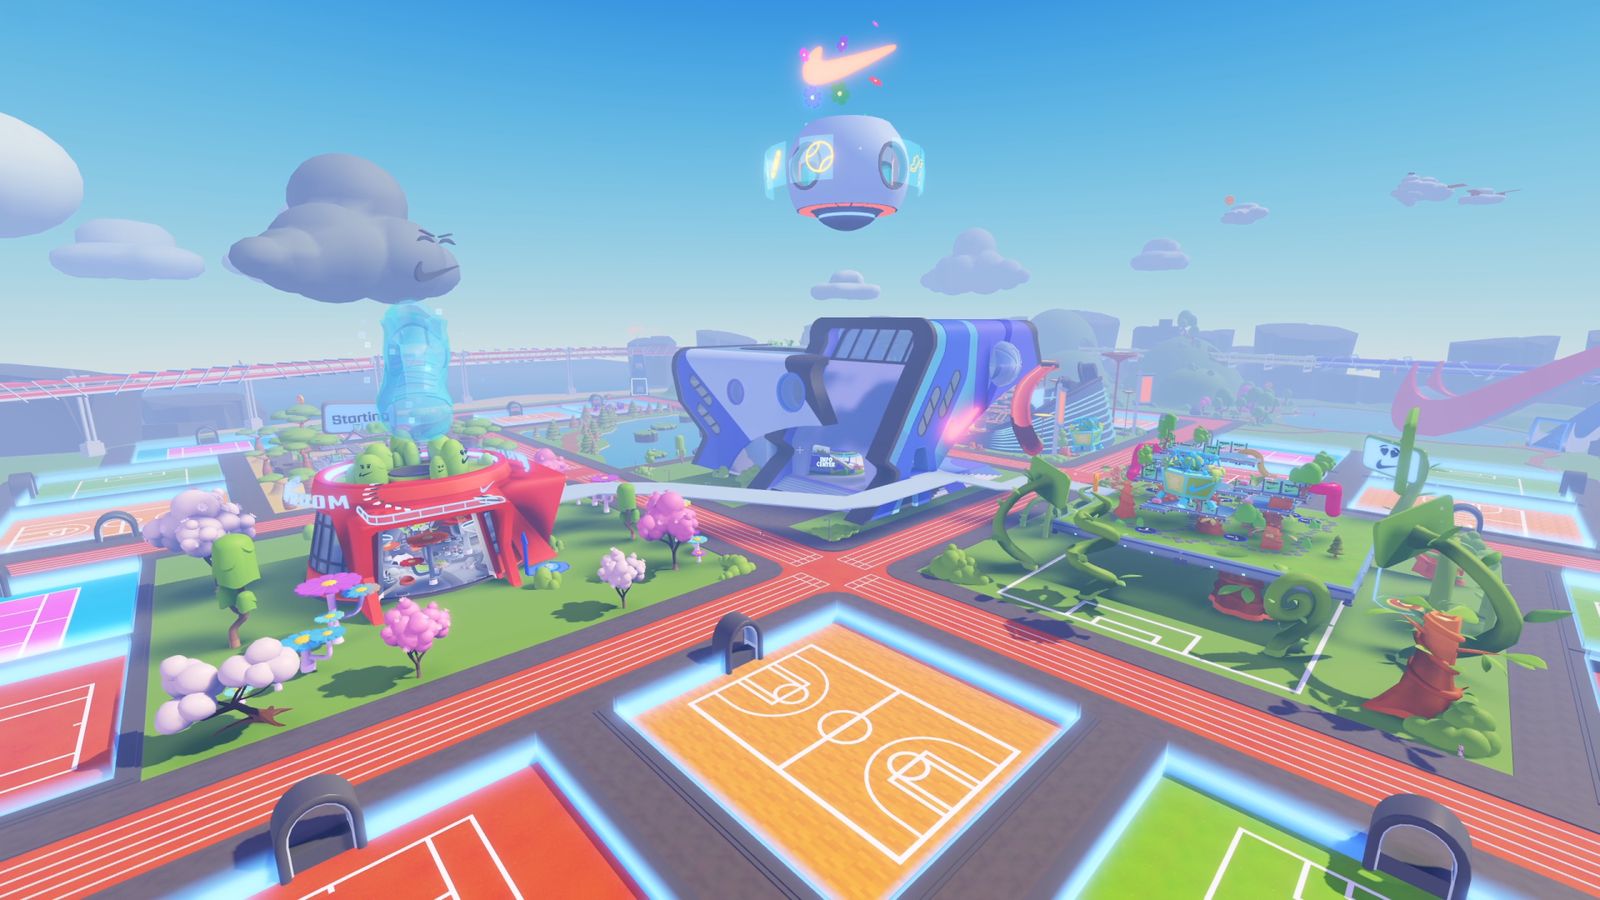 Nike will build its metaverse in the game Roblox?